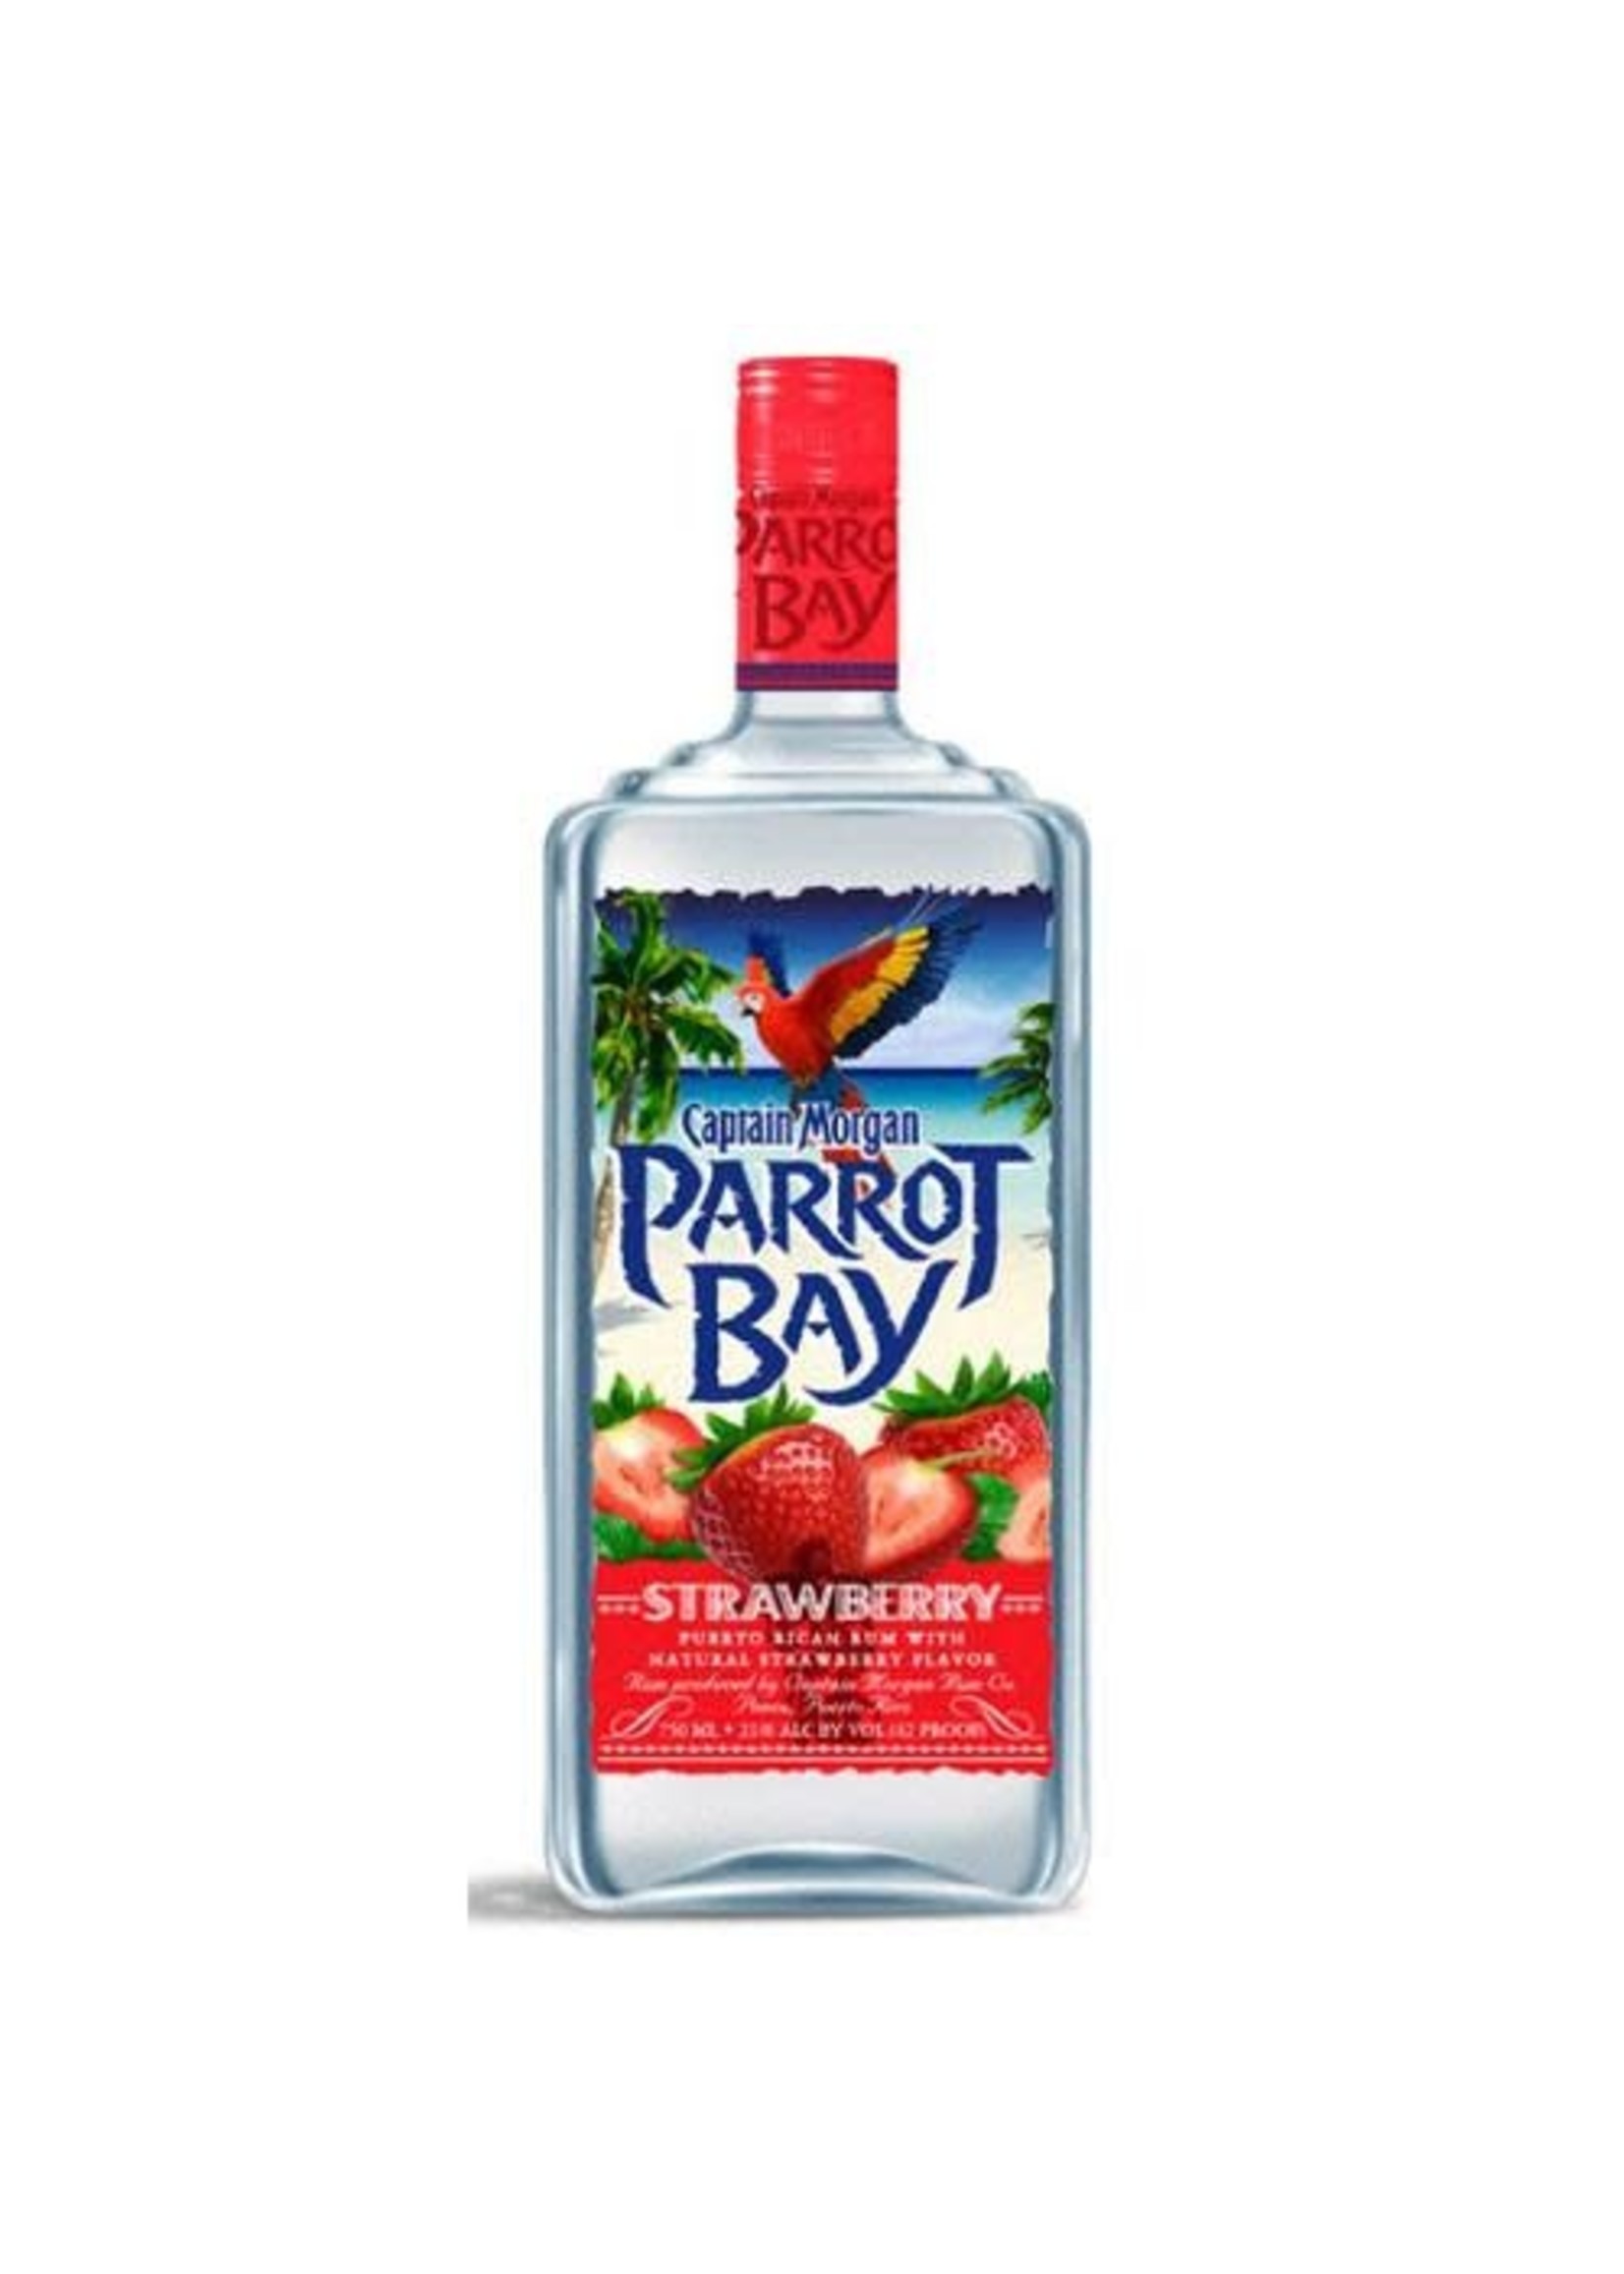 Parrot Bay Strawberry Pet 42Proof 750ml